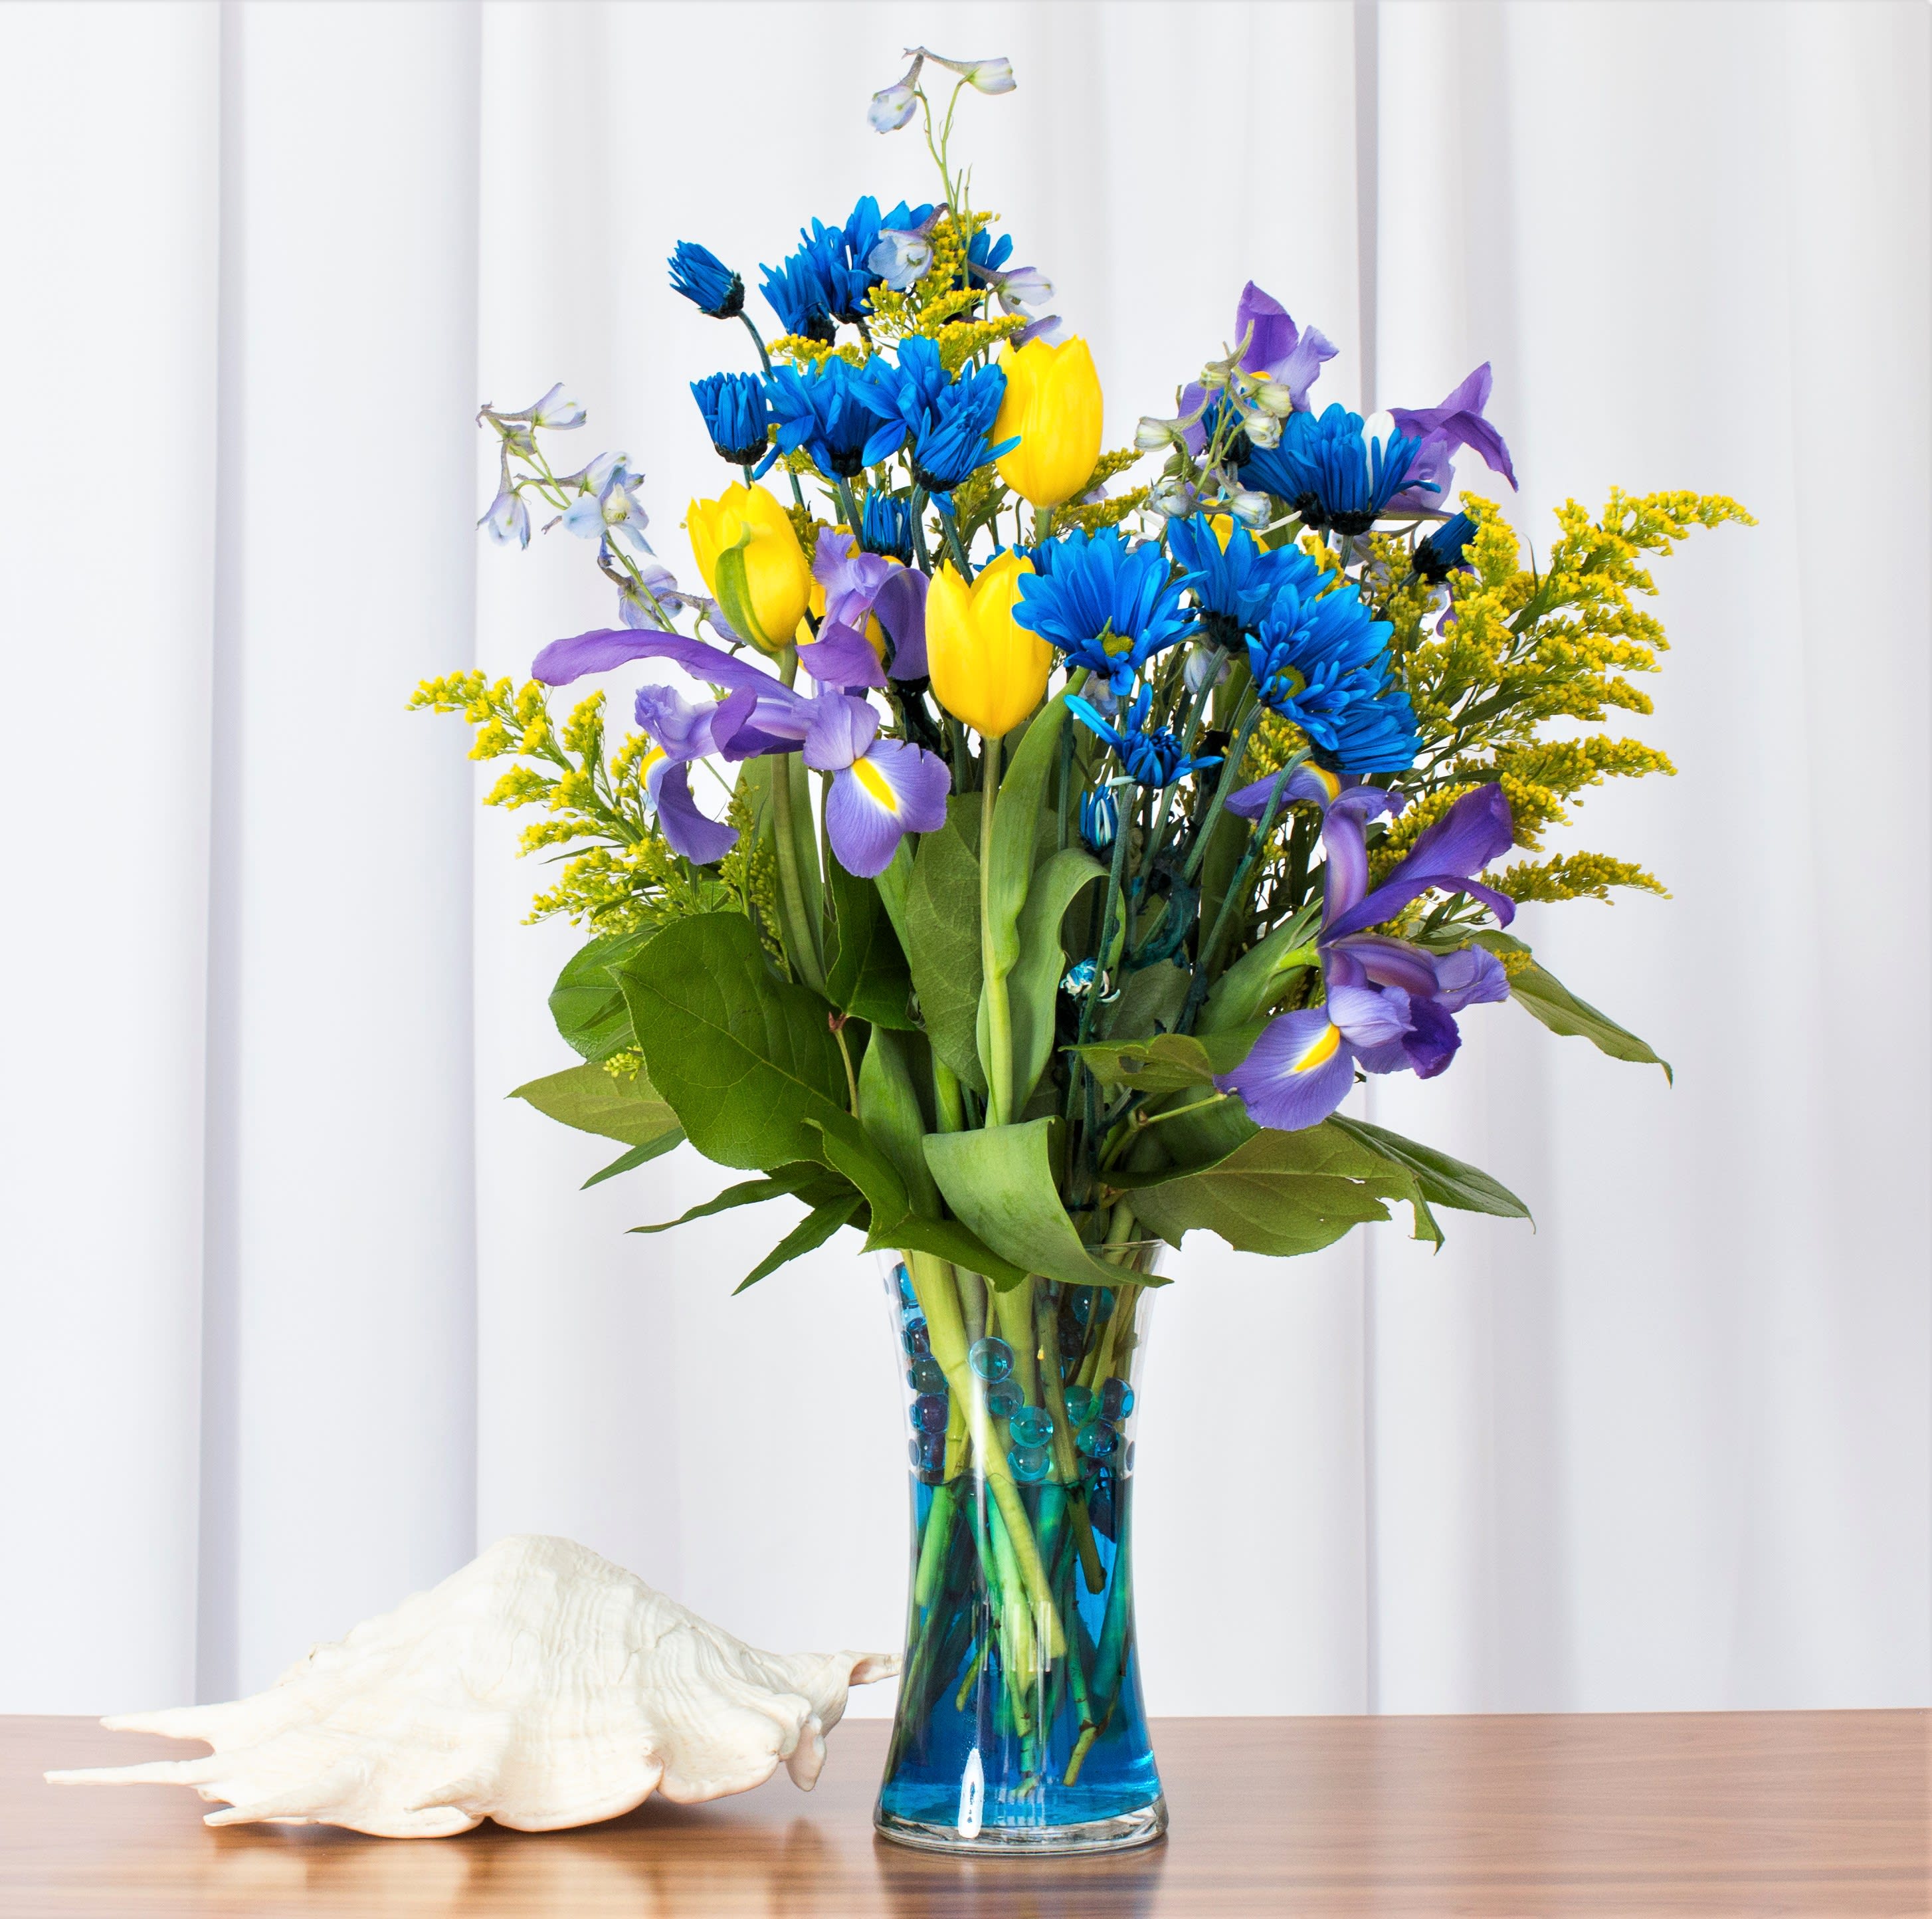 Cool Blue  - Feel Blue...................in a GOOD way!! Perfect for a man or someone who just loves the color blue!  With Iris, mums, Tulips and accented with aster and greens.